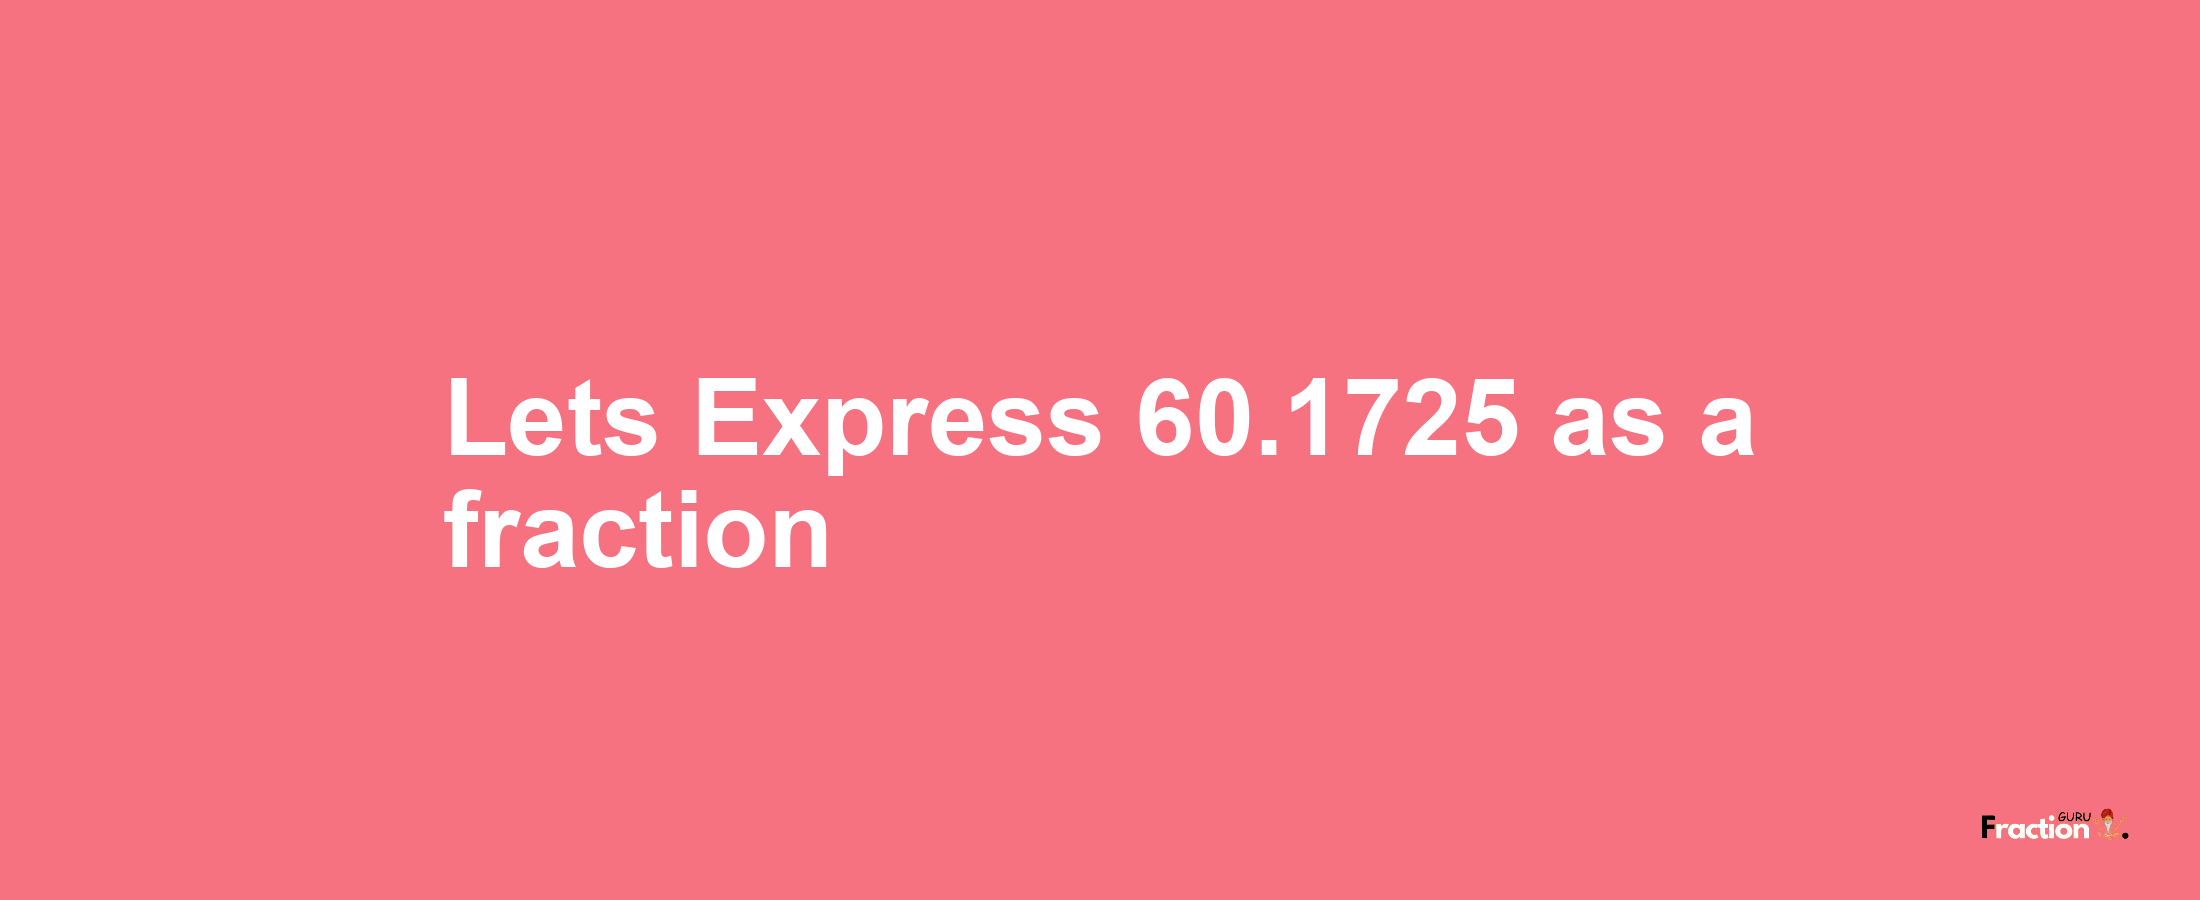 Lets Express 60.1725 as afraction